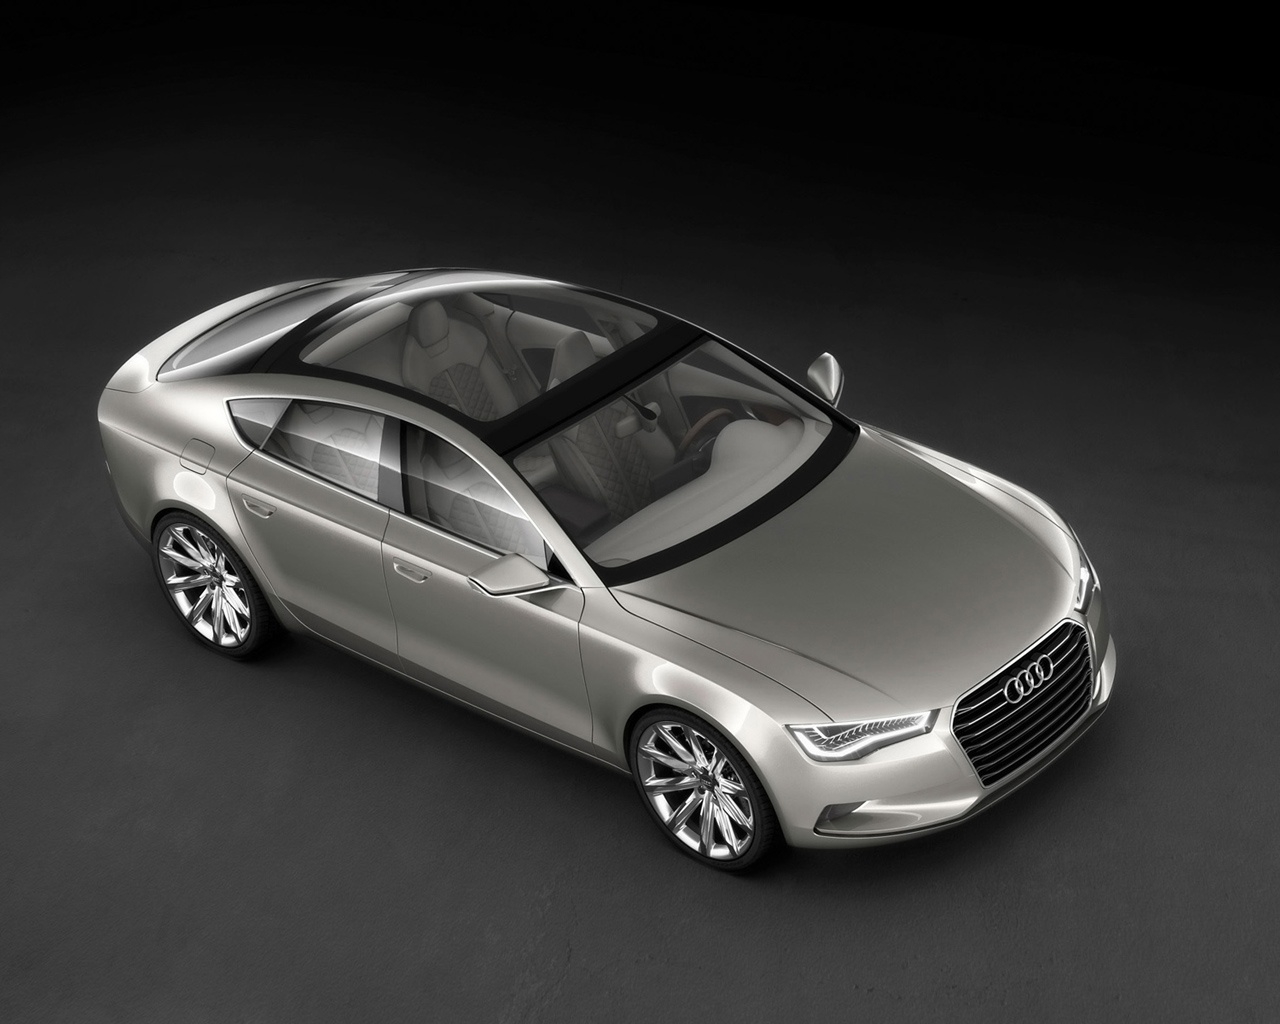 2009 Audi Sportback Concept - Front And Side Top for 1280 x 1024 resolution